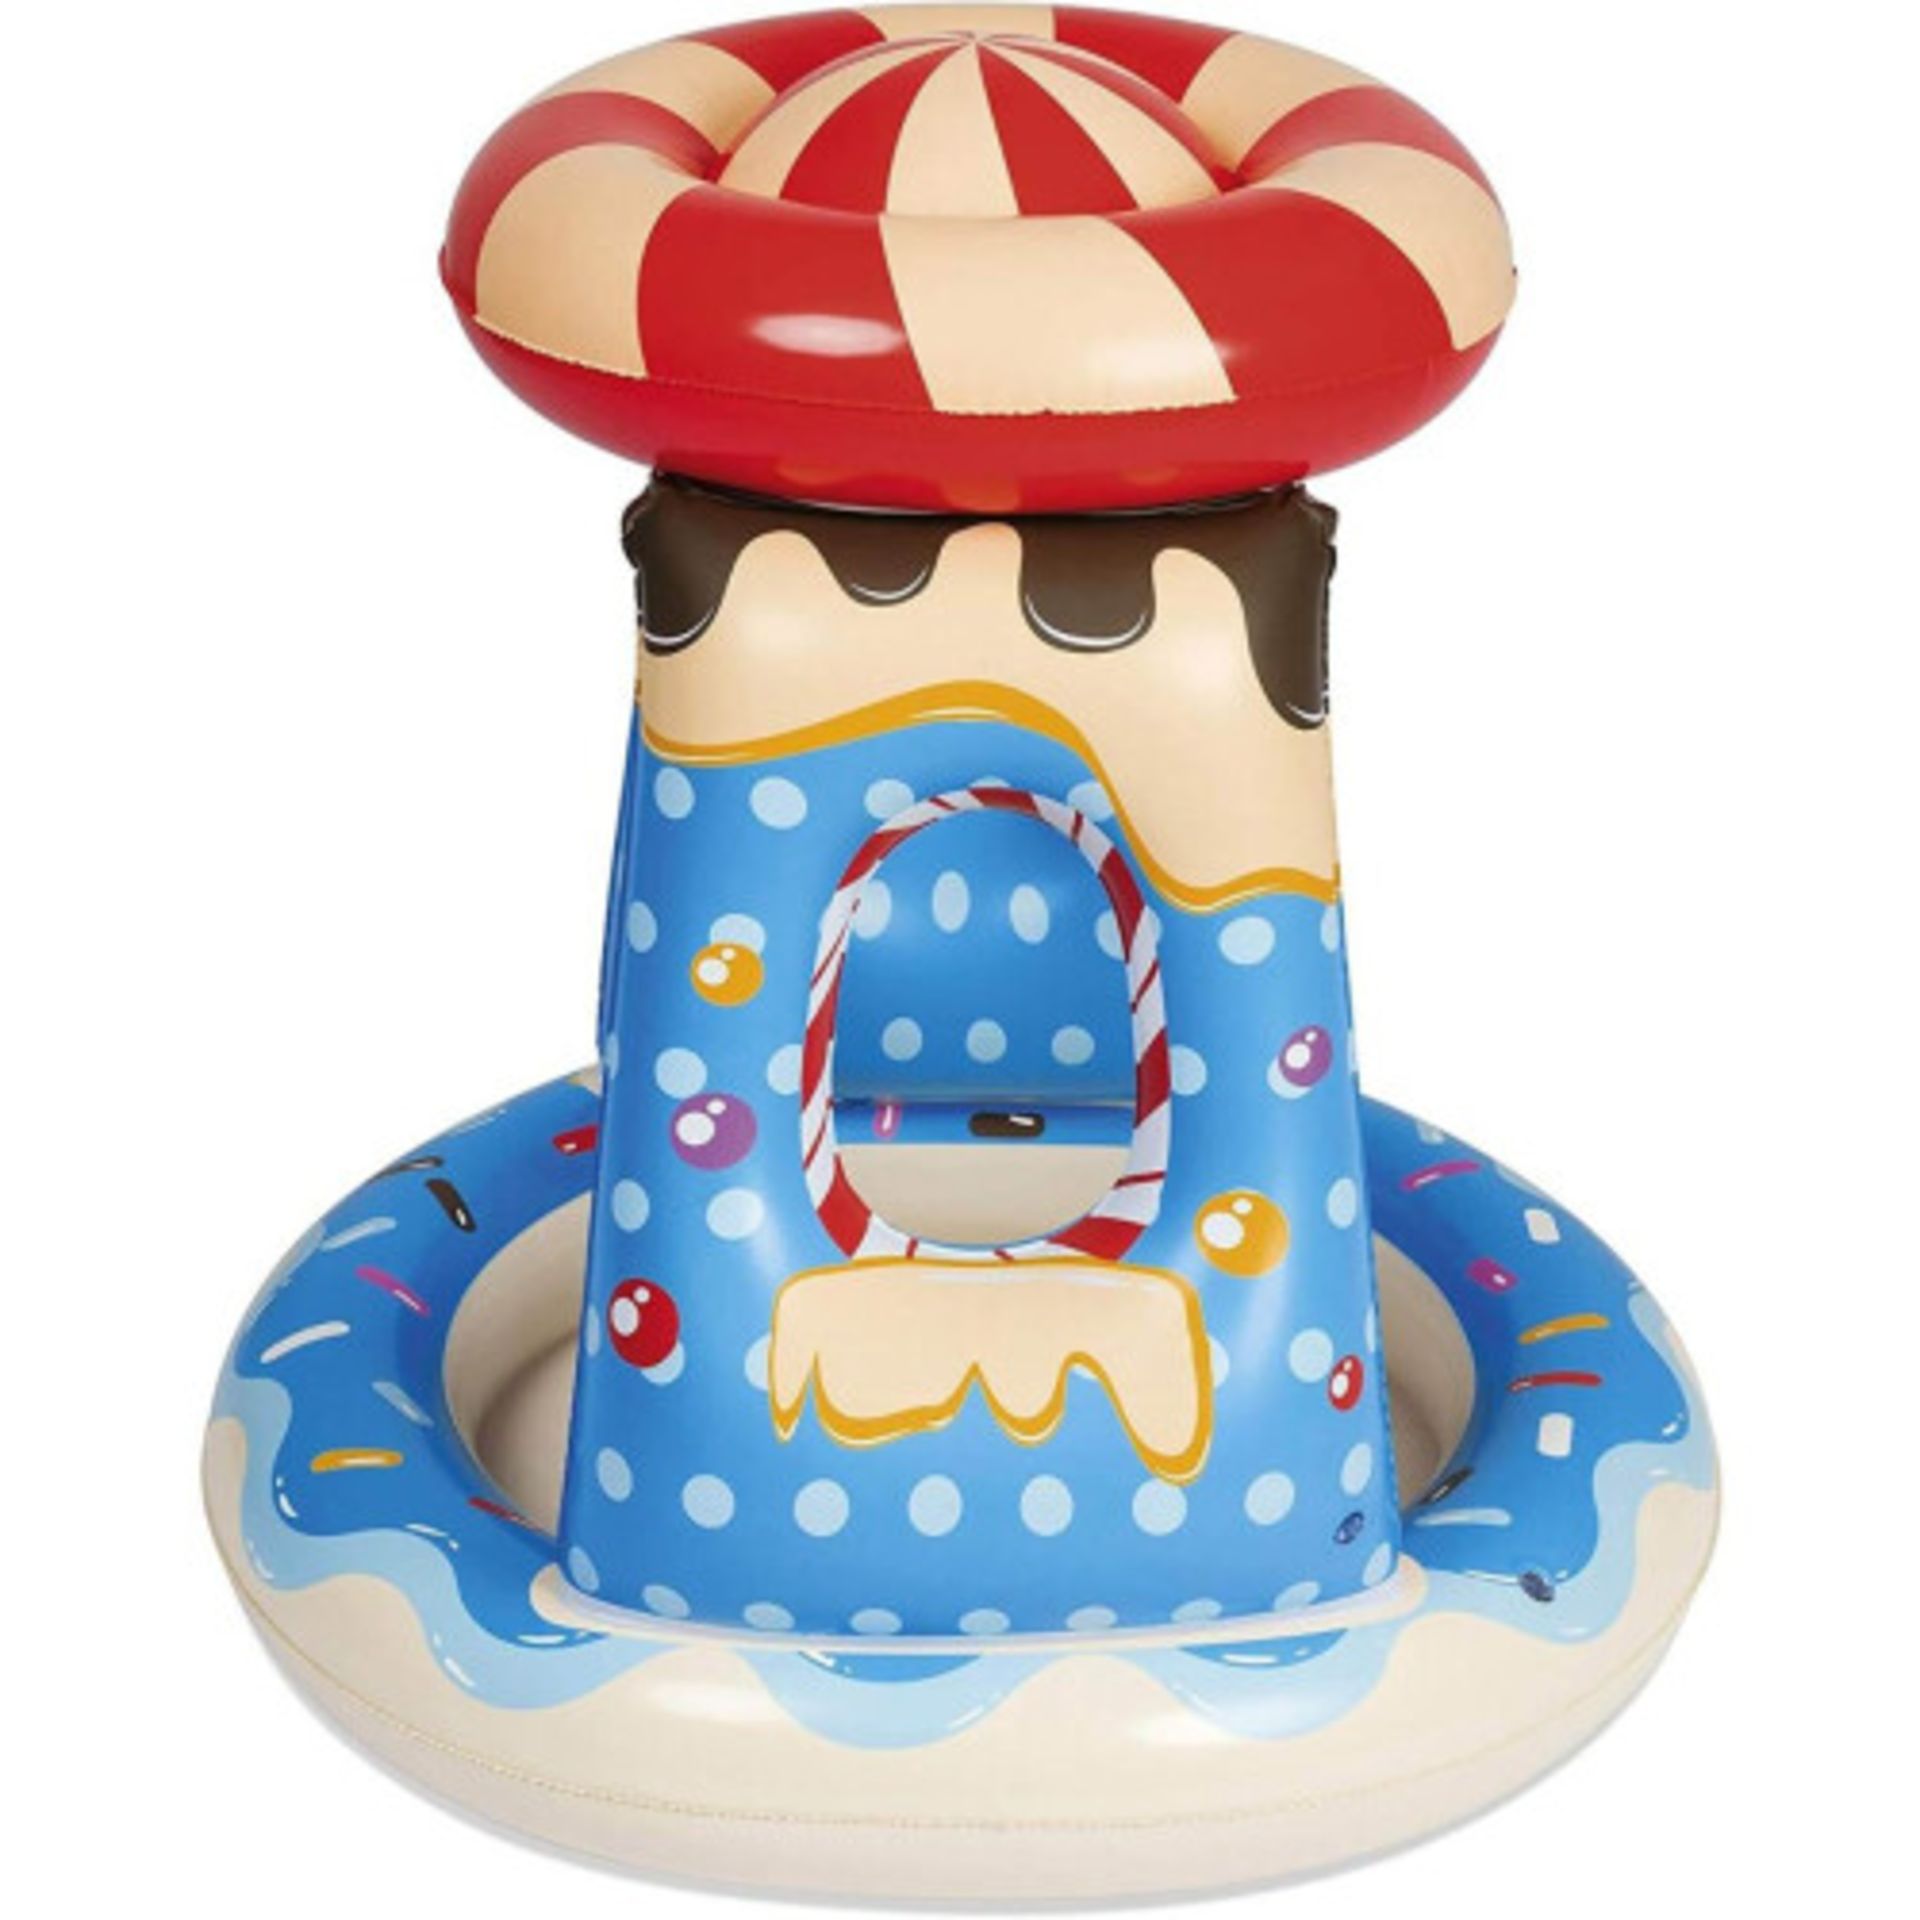 9 X BRAND NEW BESTWAY CANDYVILLE BABY INFLATABLE PADDLING POOL WITH SUNSHADE (91CM X 91 CM X 89 CM ) - Image 3 of 3